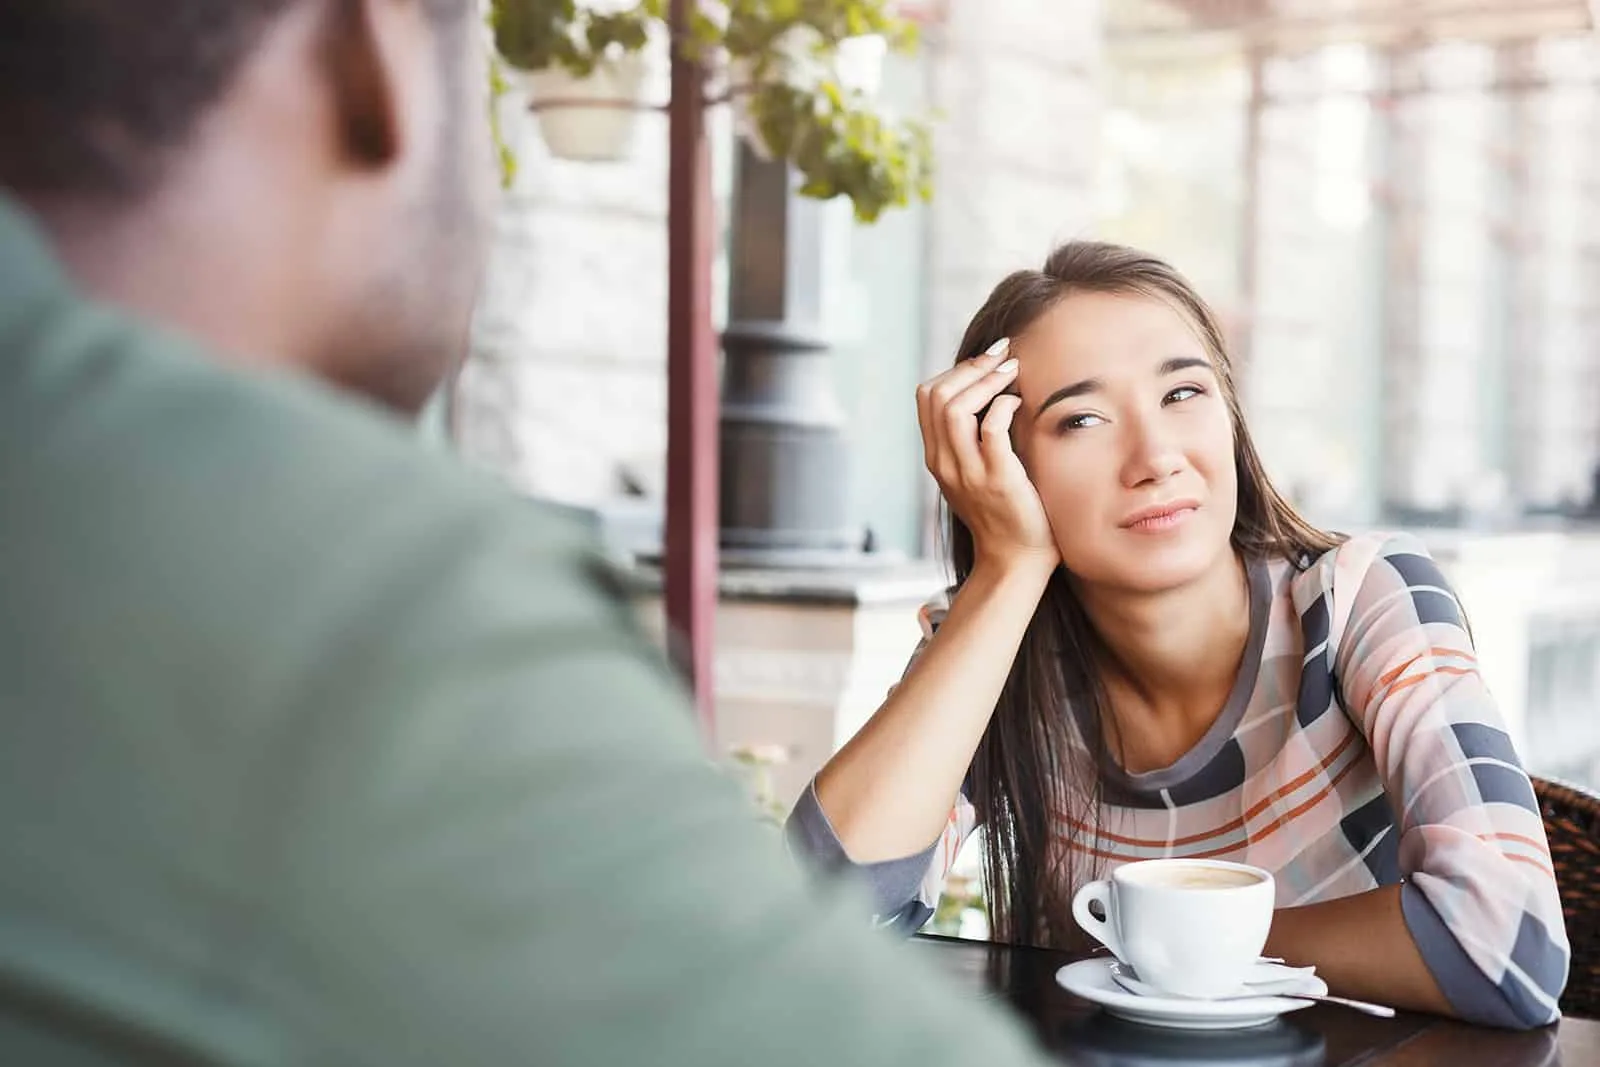 confused woman looking at man sitting with her in a cafe on a date